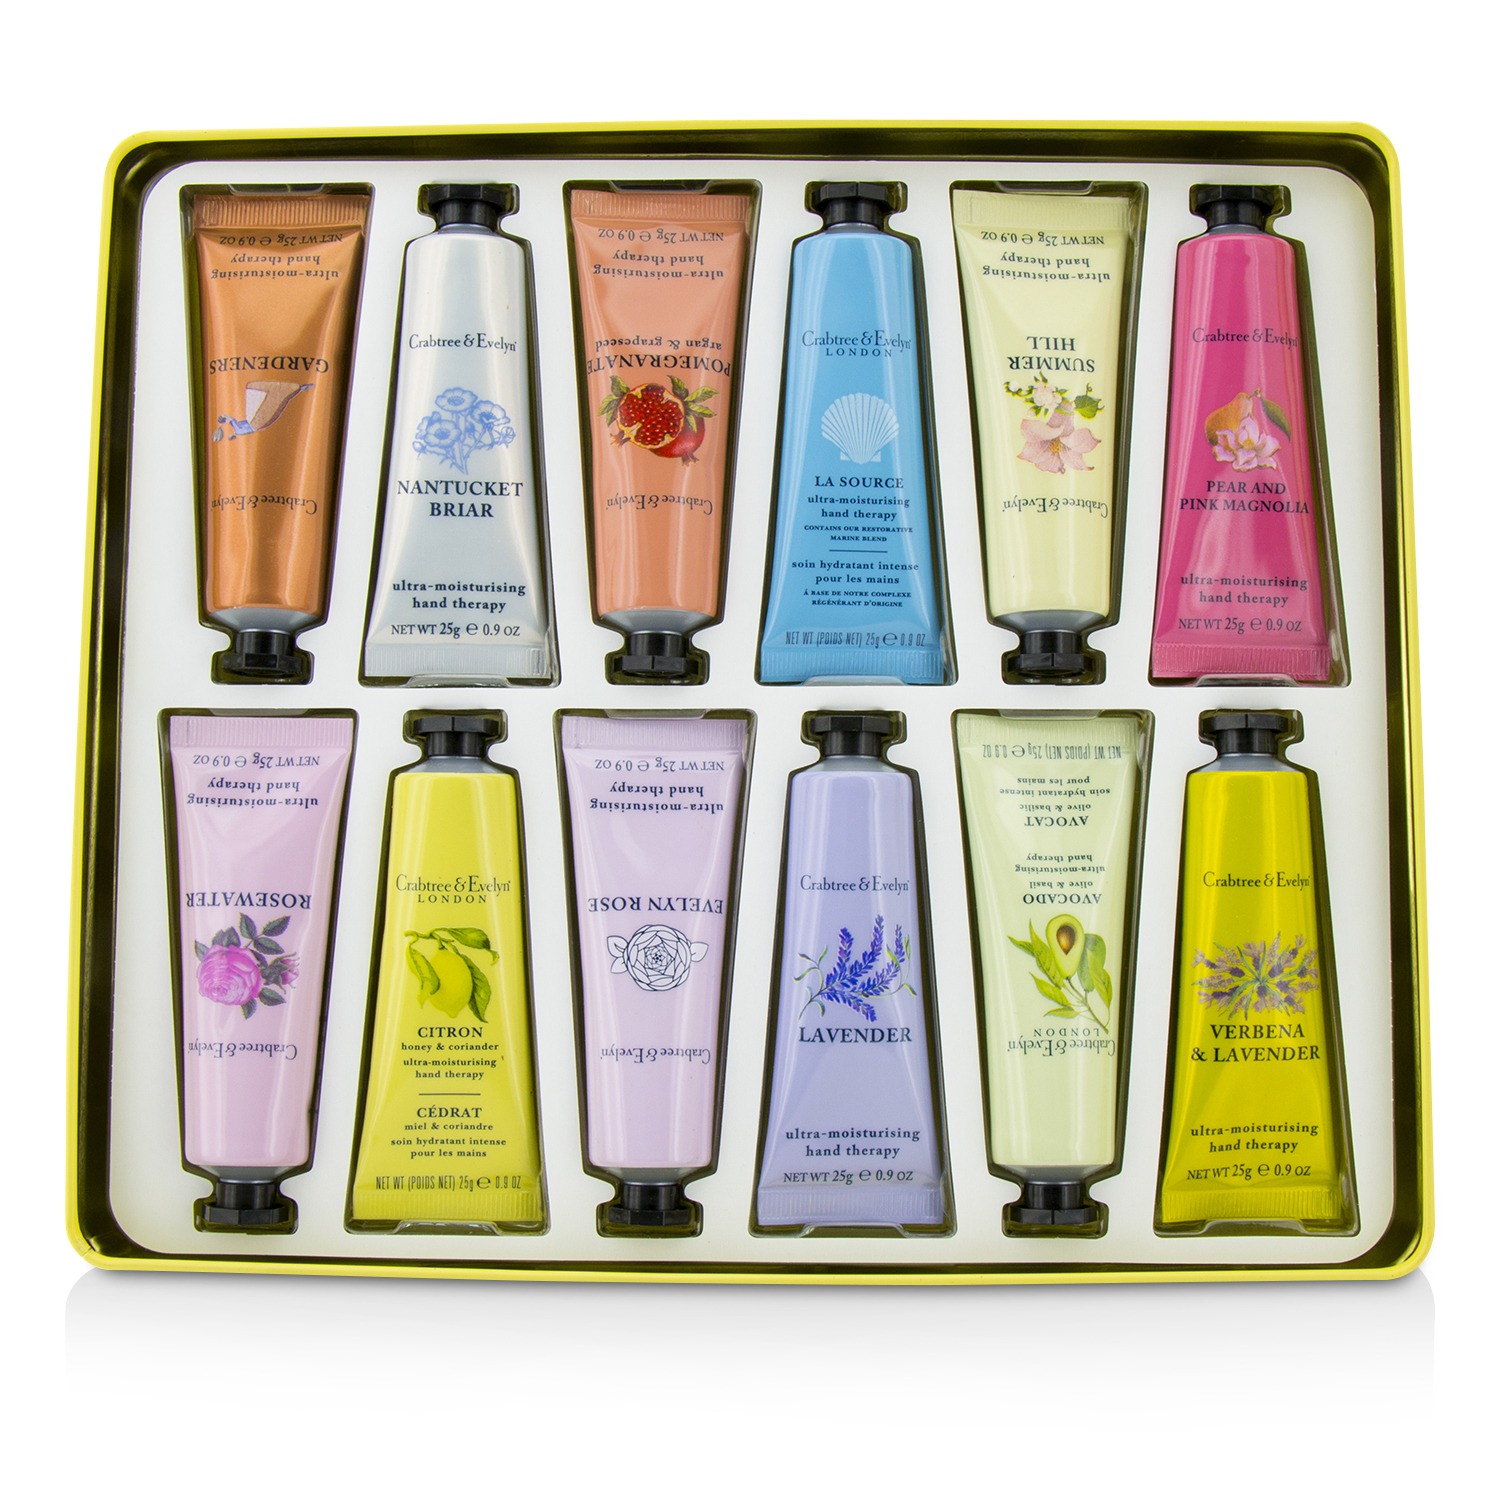 Ultra-Moisturising Hand Therapy Set Crabtree & Evelyn Image